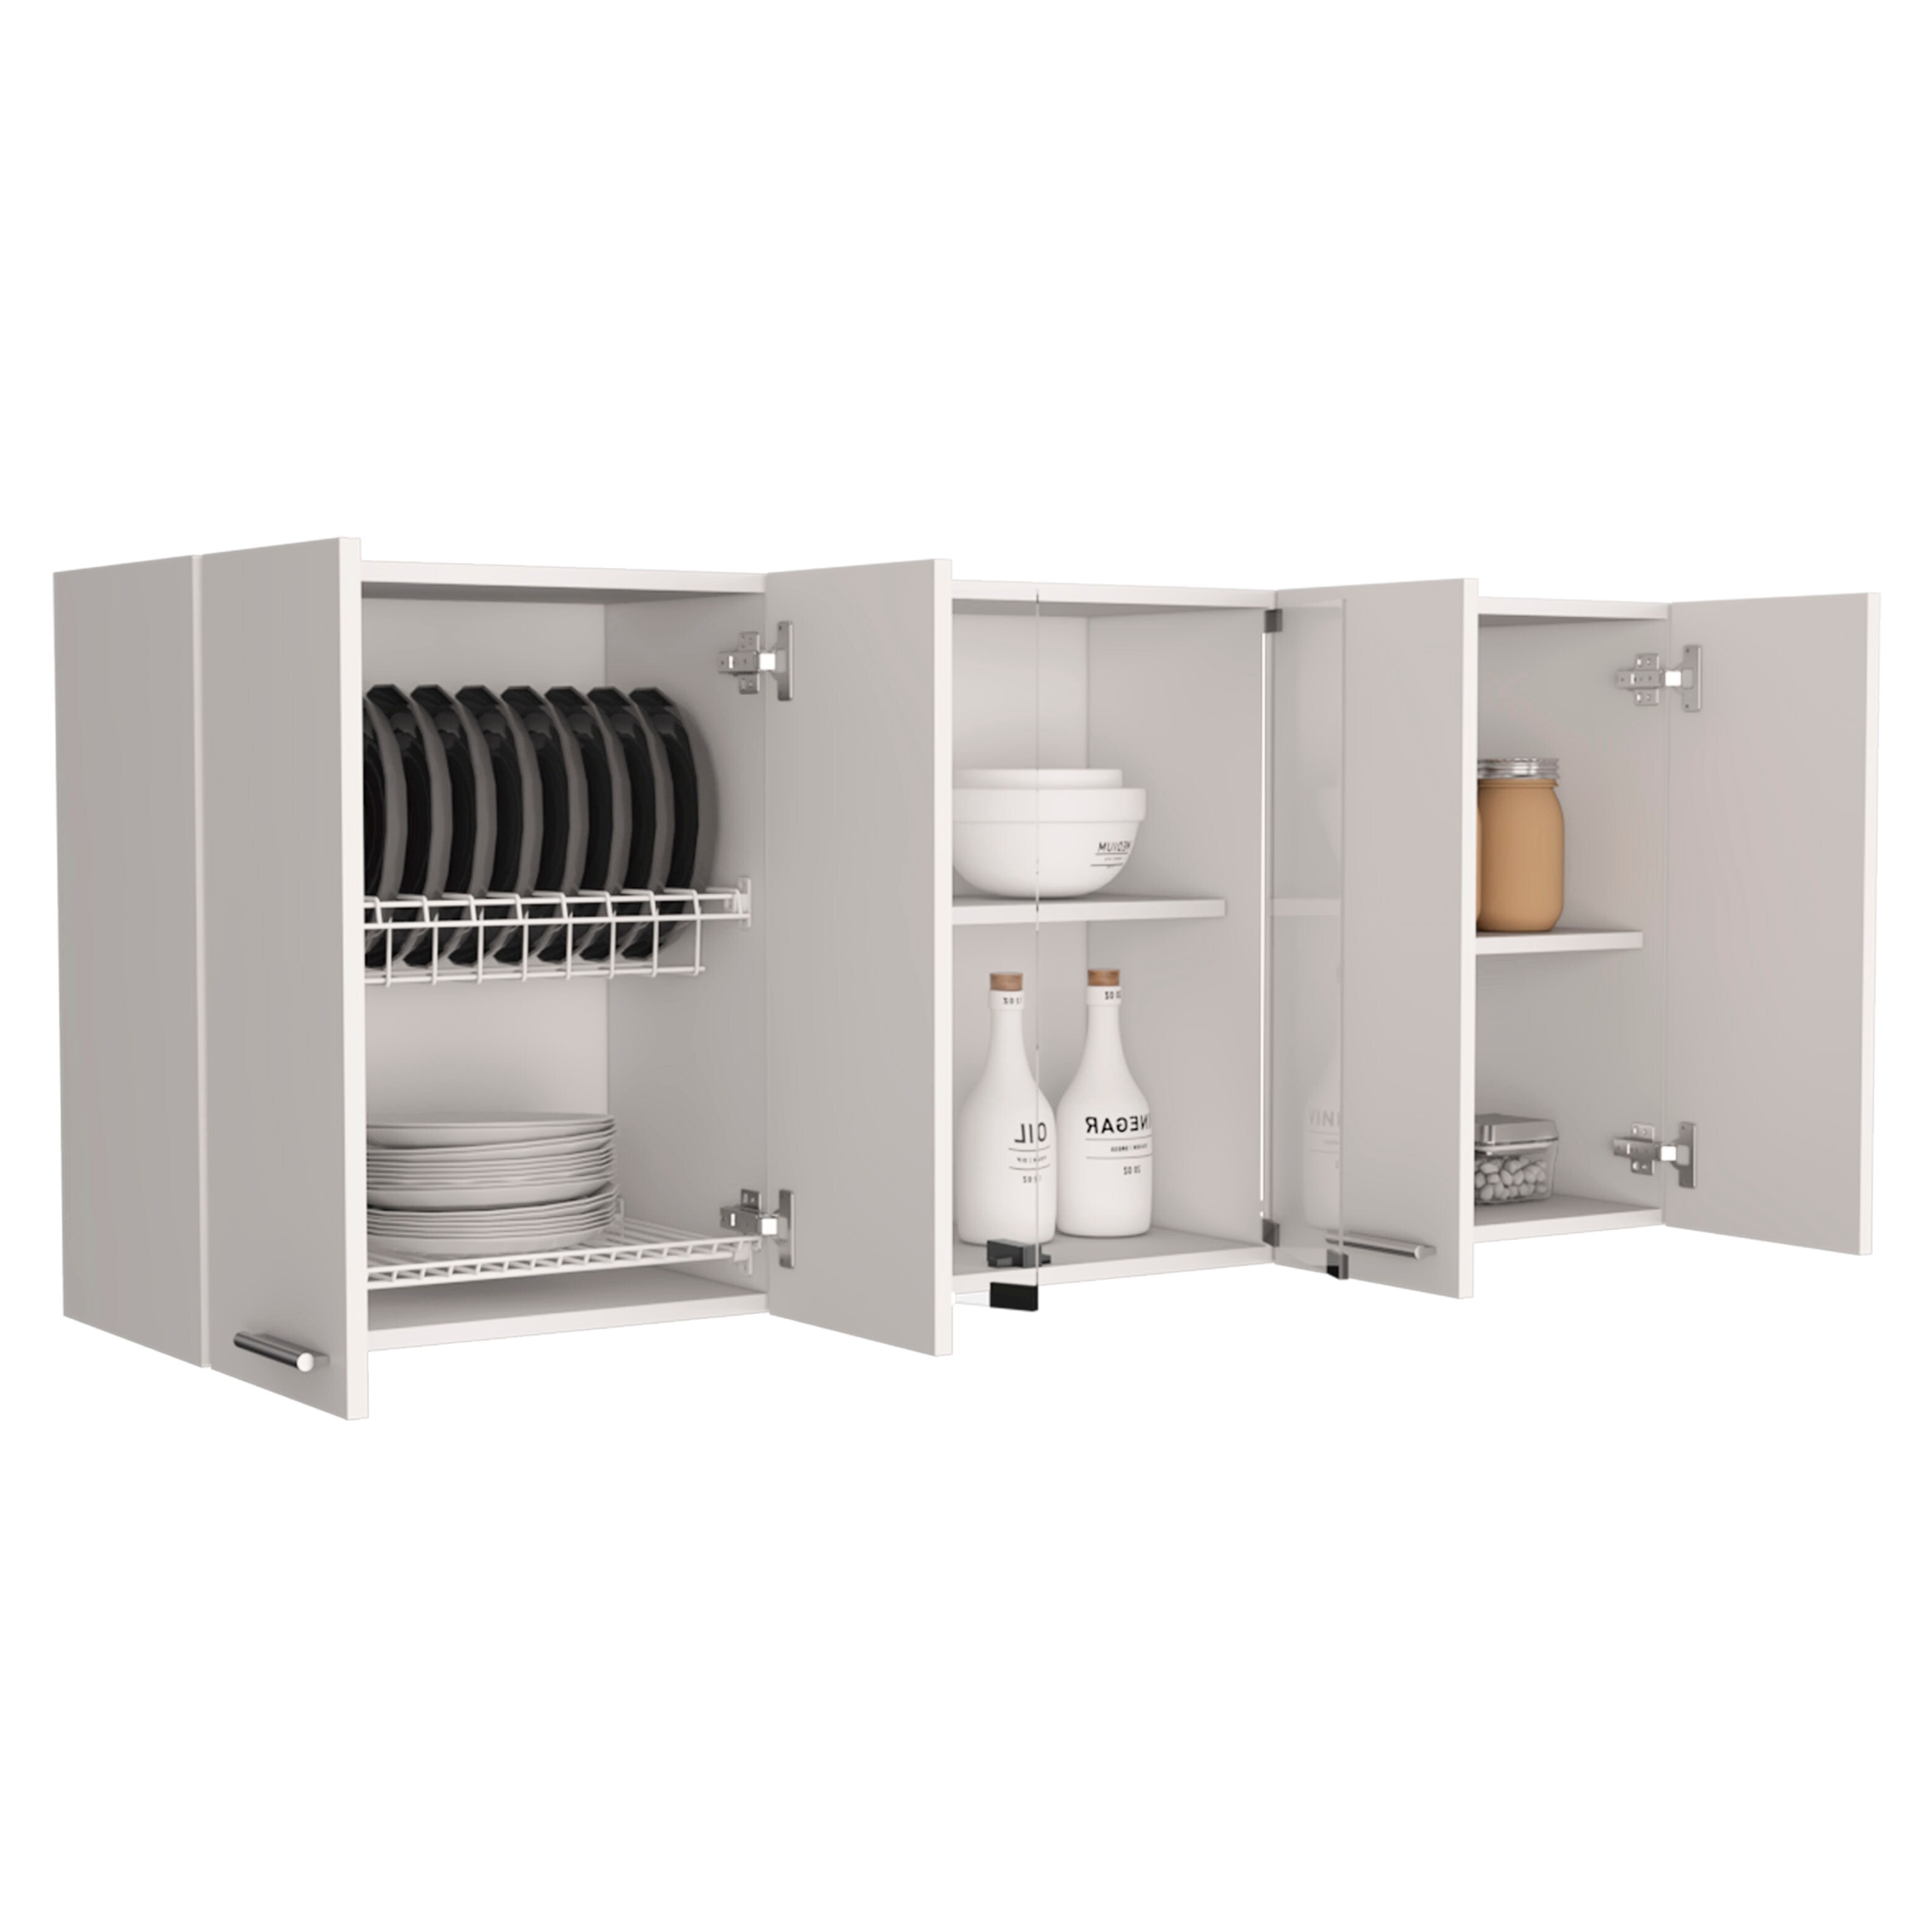 Oceana 150 Wall Double Door Cabinet With Glass, Four Interior Shelves, Glass Cabinet - White